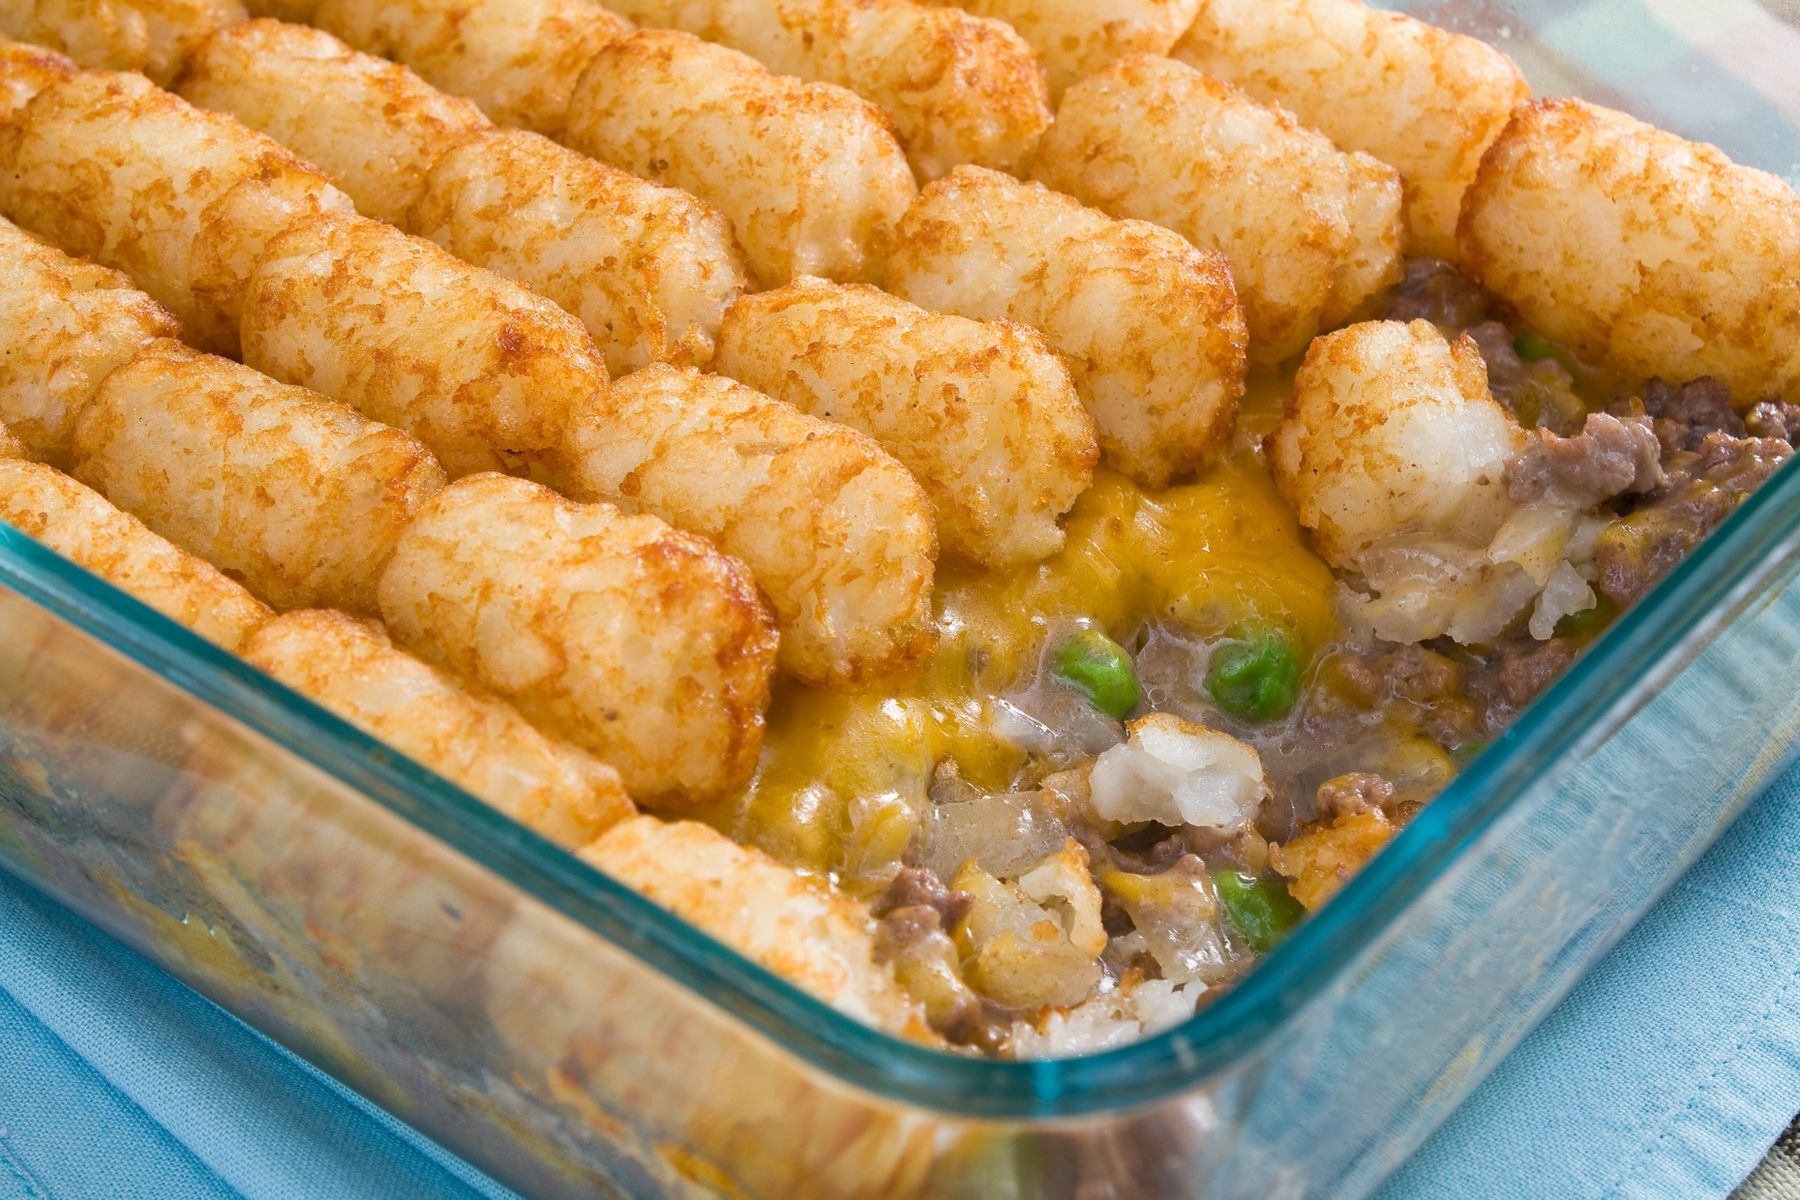 <p>So simple, yet so good! This <a href="https://www.tastesoflizzyt.com/cheeseburger-tater-tot-casserole/">cheeseburger tater tot casserole</a> will delight young and old alike.</p>